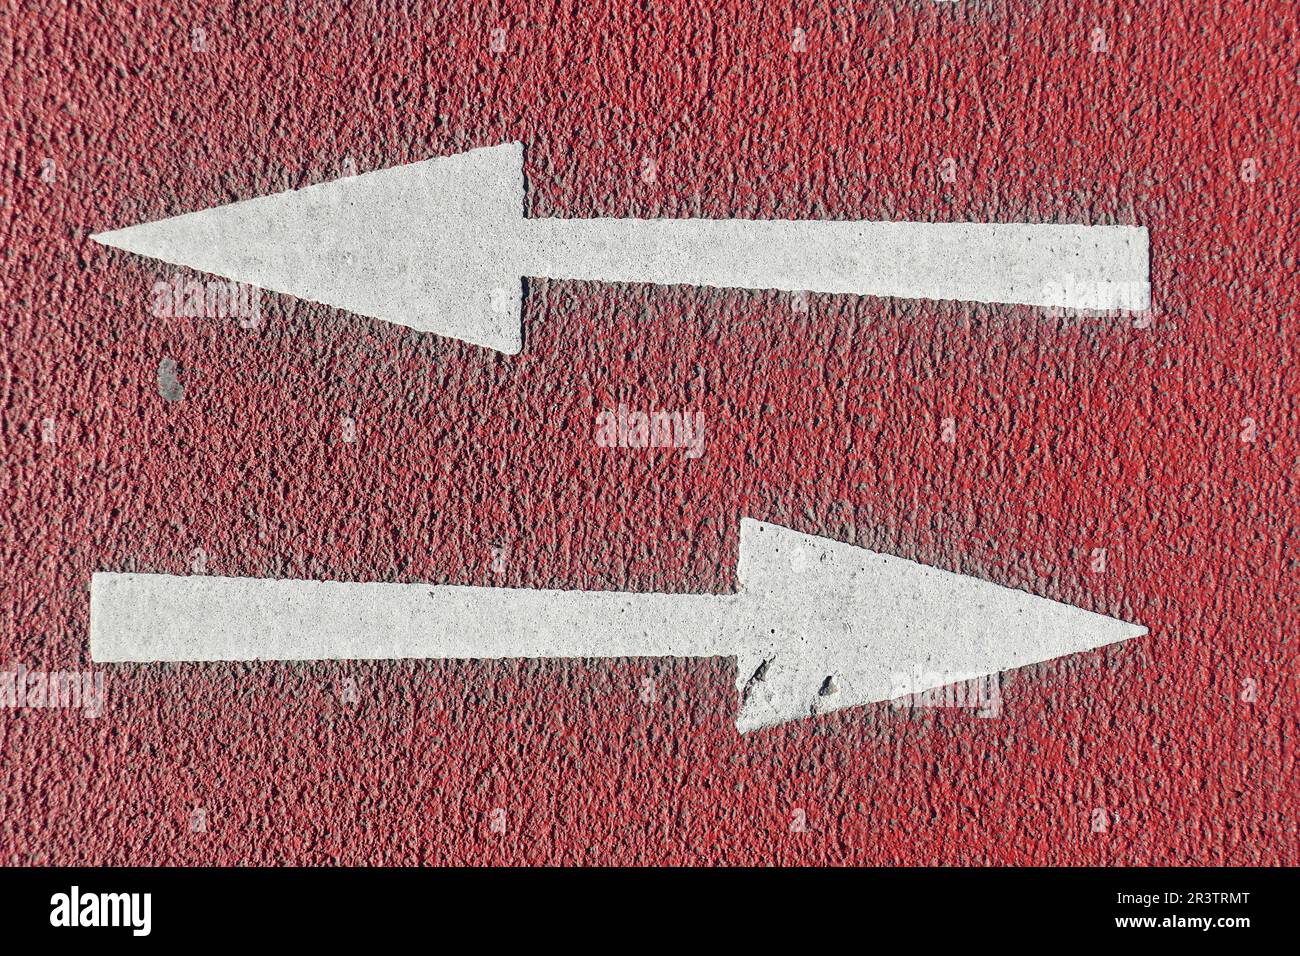 Ground marking directional arrows on a cycle path, Germany Stock Photo